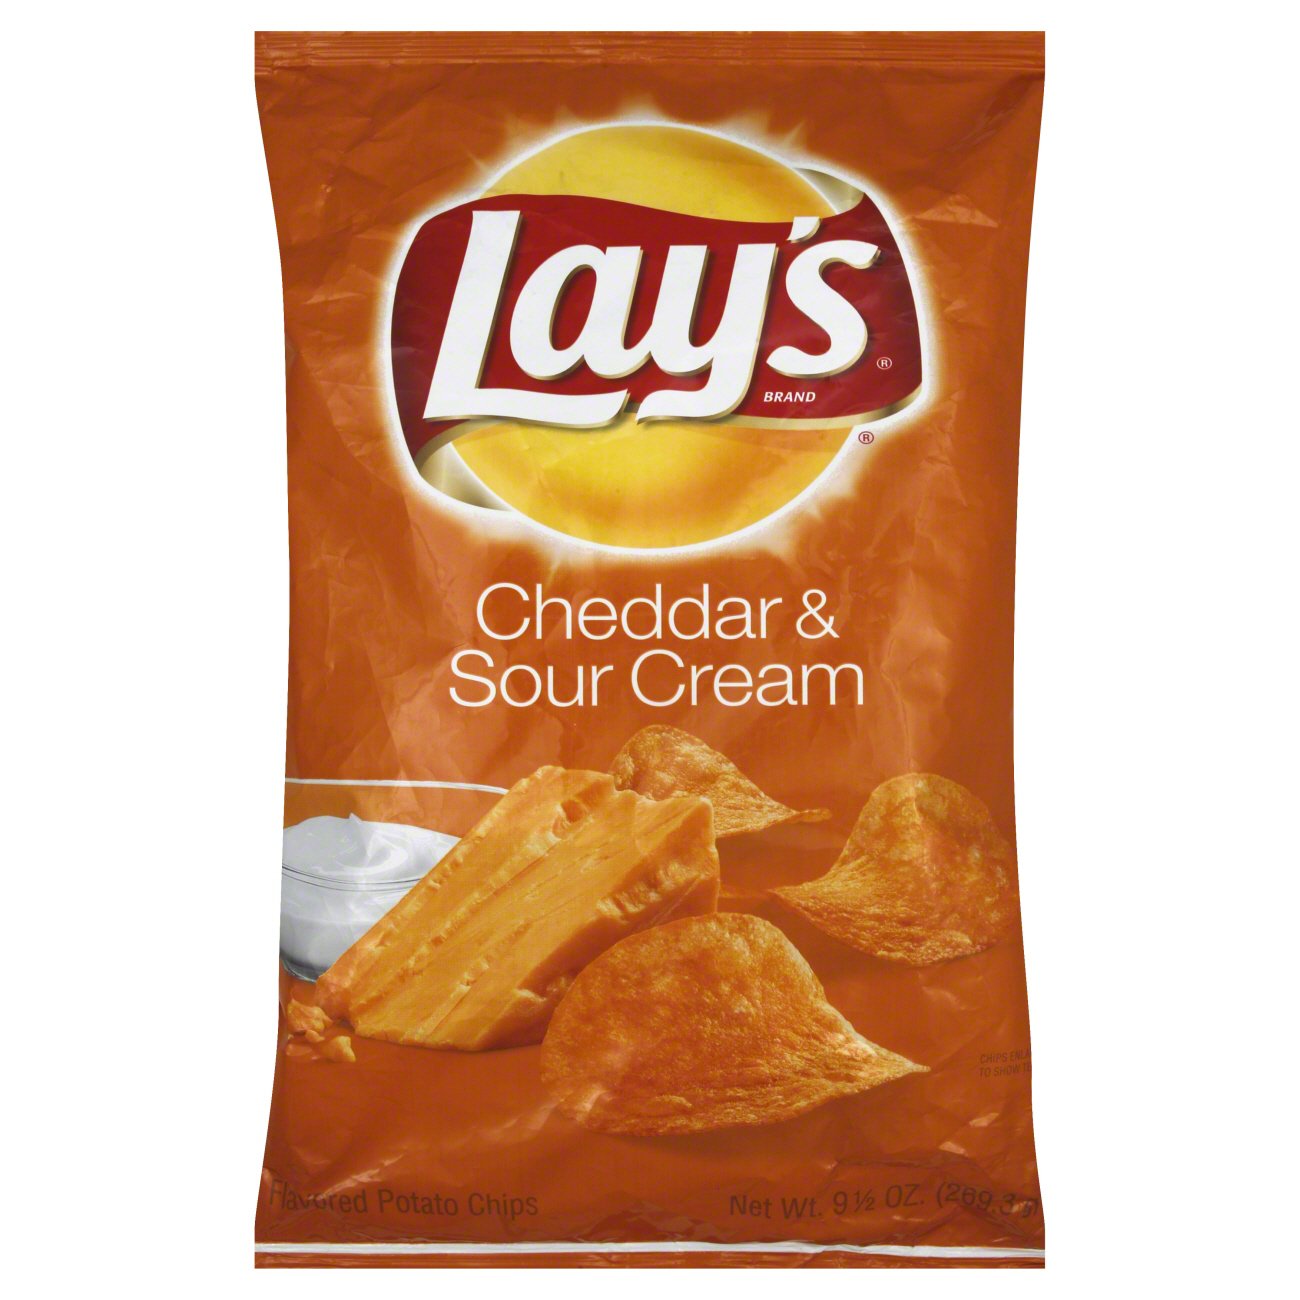 Lay's Cheddar & Sour Cream Flavored Potato Chips - Shop at H-E-B